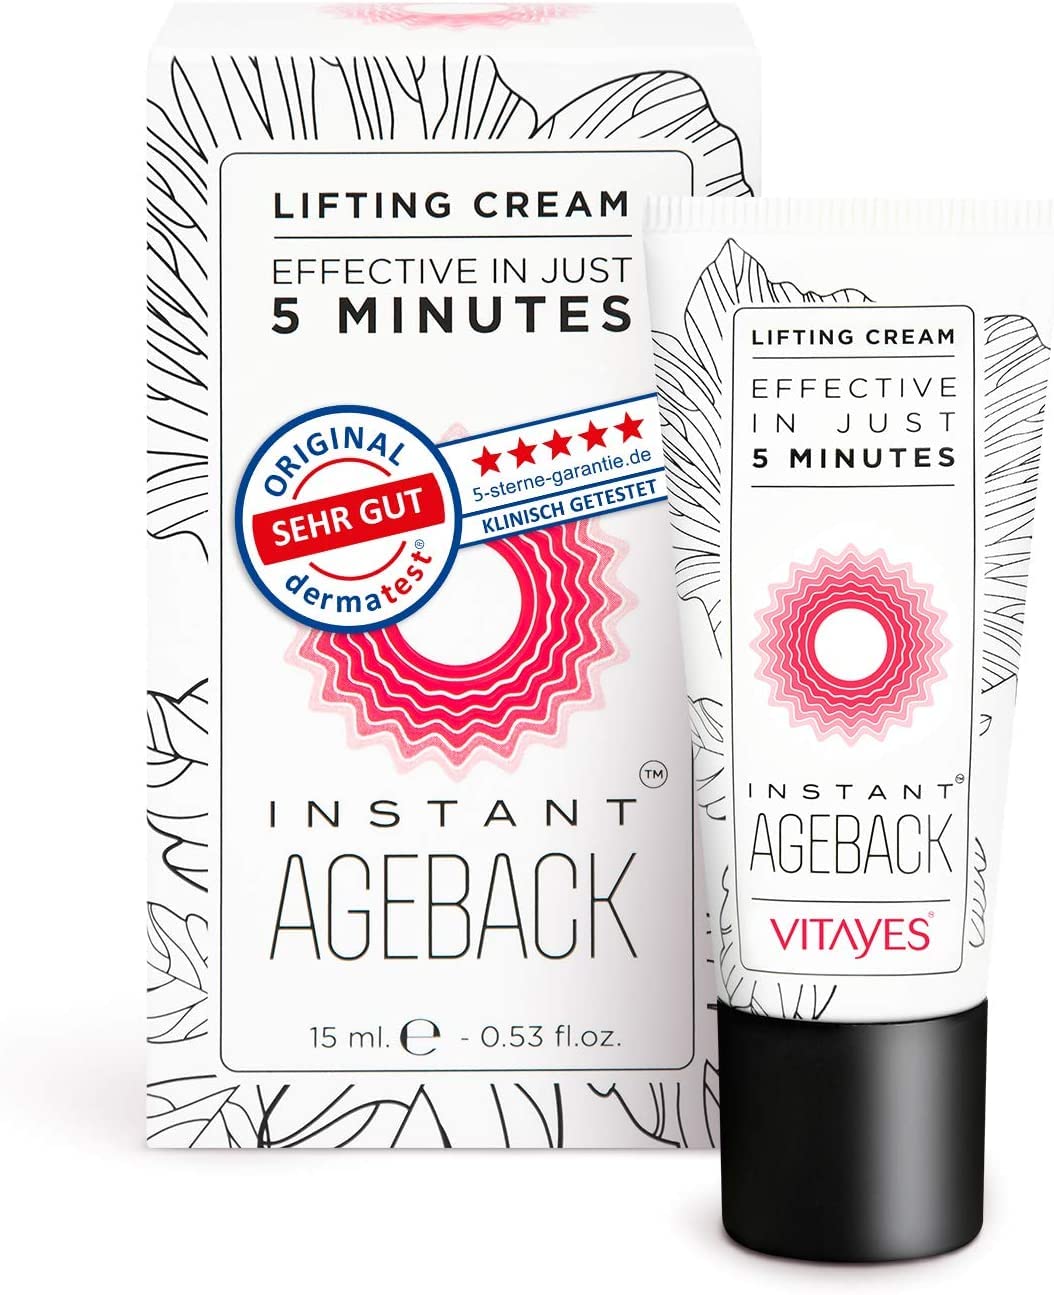 VITAYES Instant Ageback Face Lifting cream - Ageless Facial Firming Skin care Argireline Beauty Product used as a Powerful Anti-